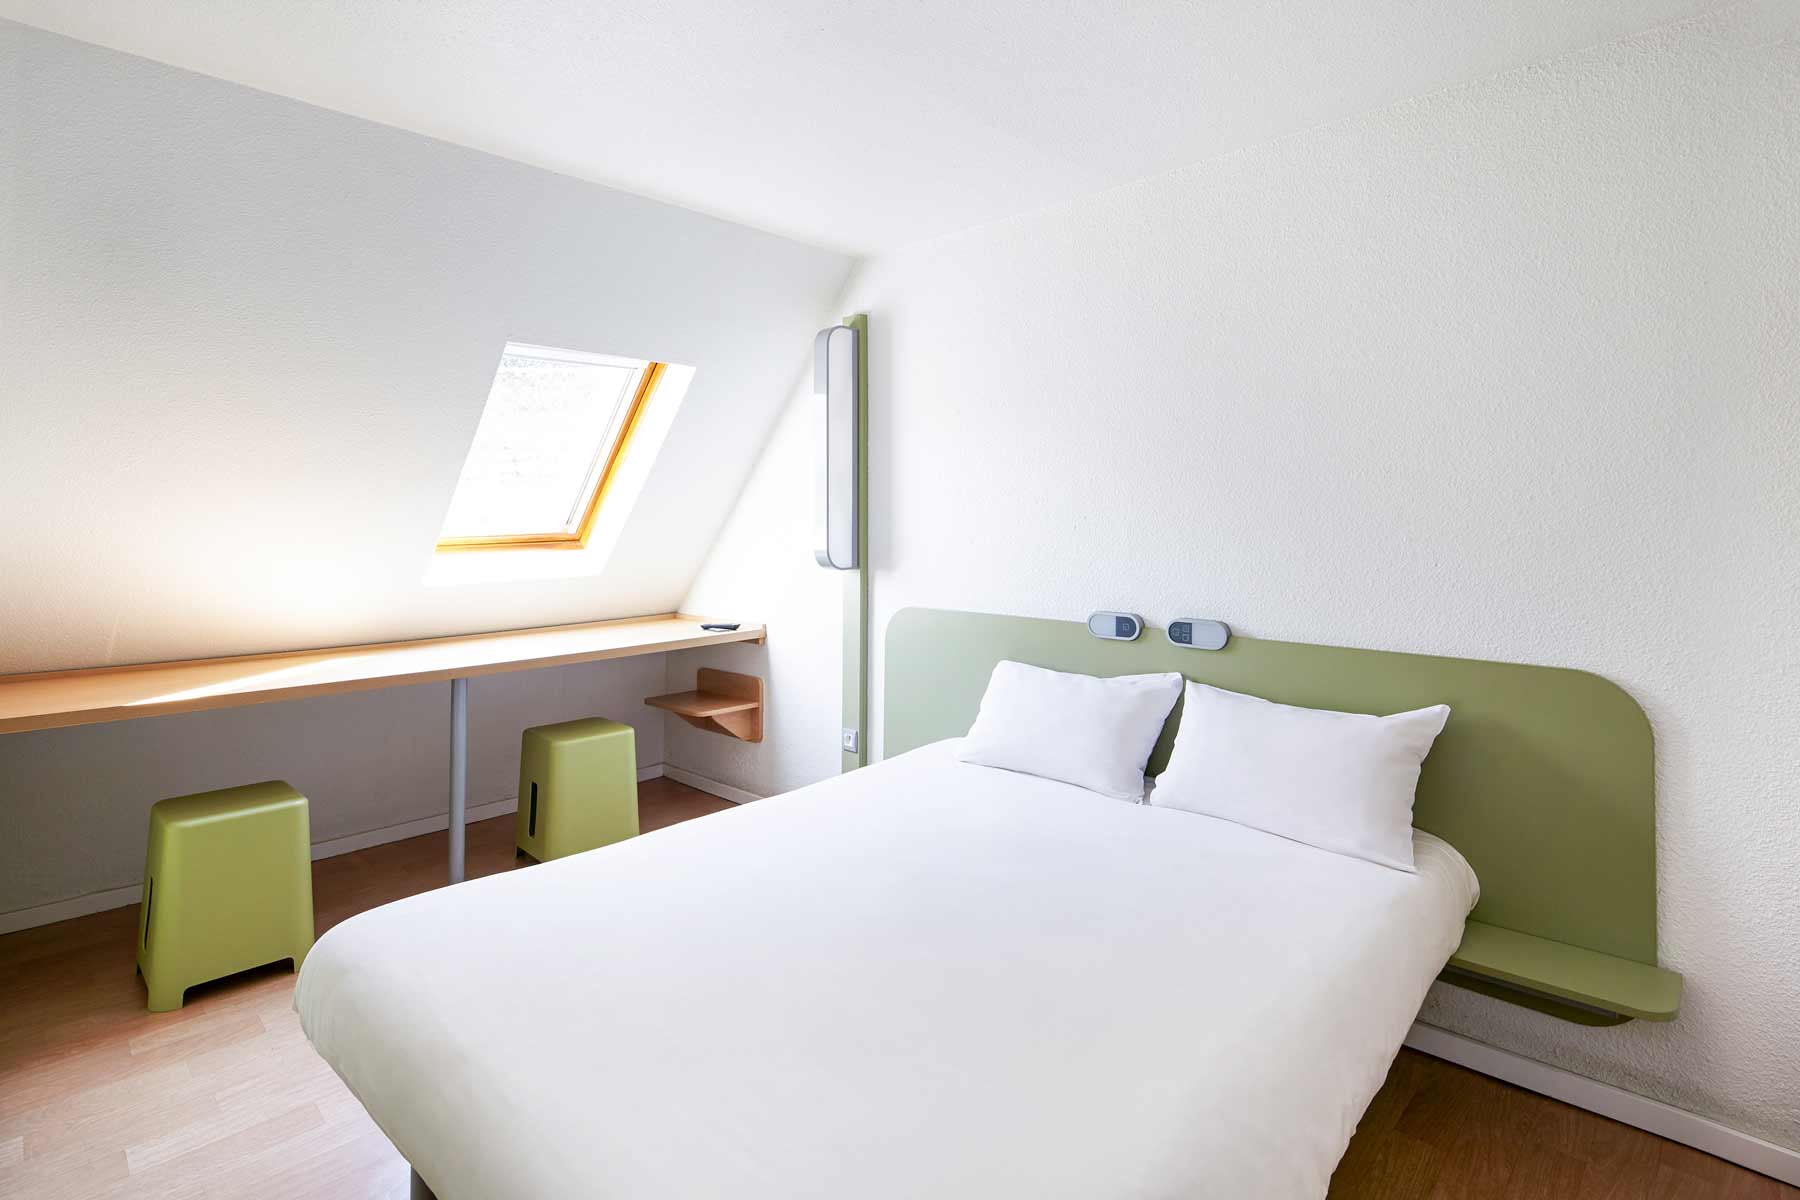 Groupe MyHotels – Ibis Budget Blois – Chambre double